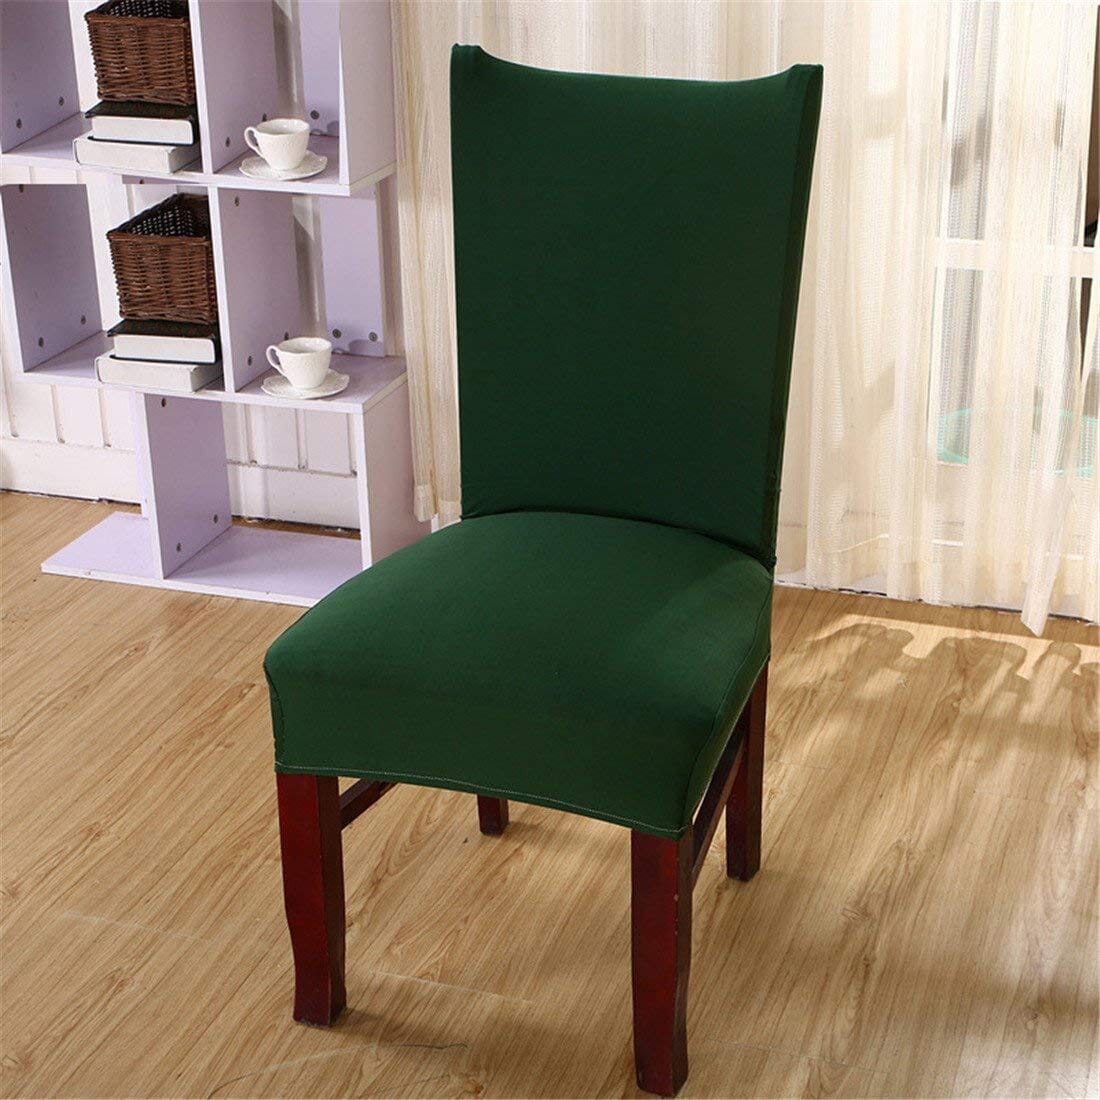 Dark Green Premium Chair Cover - Stretchable & Elastic Fitted Great Happy IN 2 PCS - ₹799 